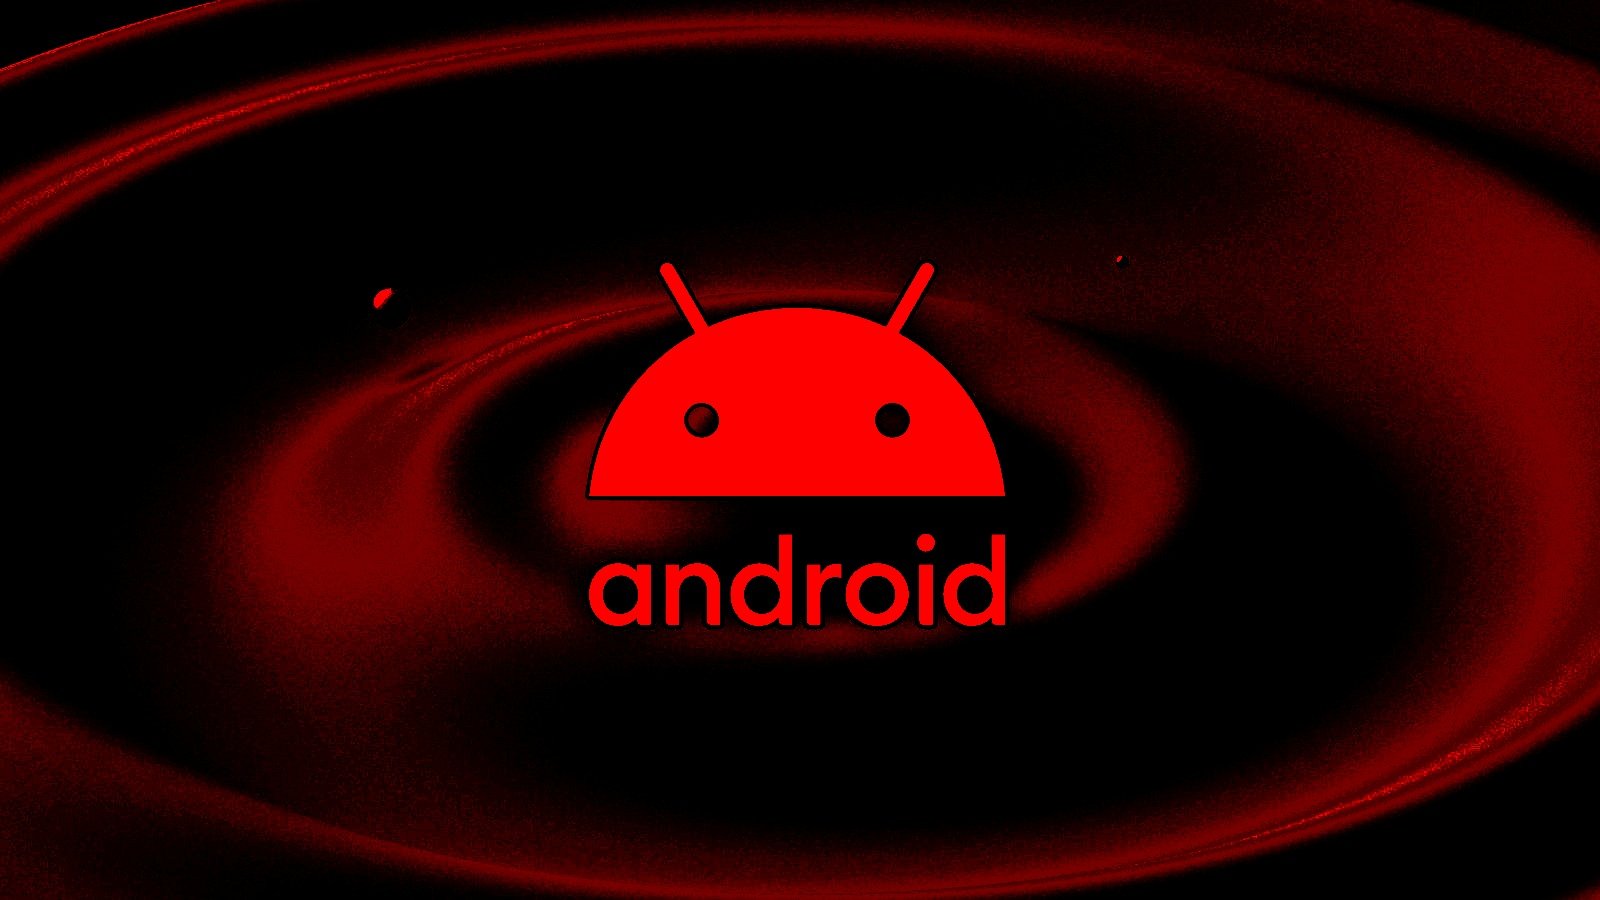 Android_headpic_red.jpg